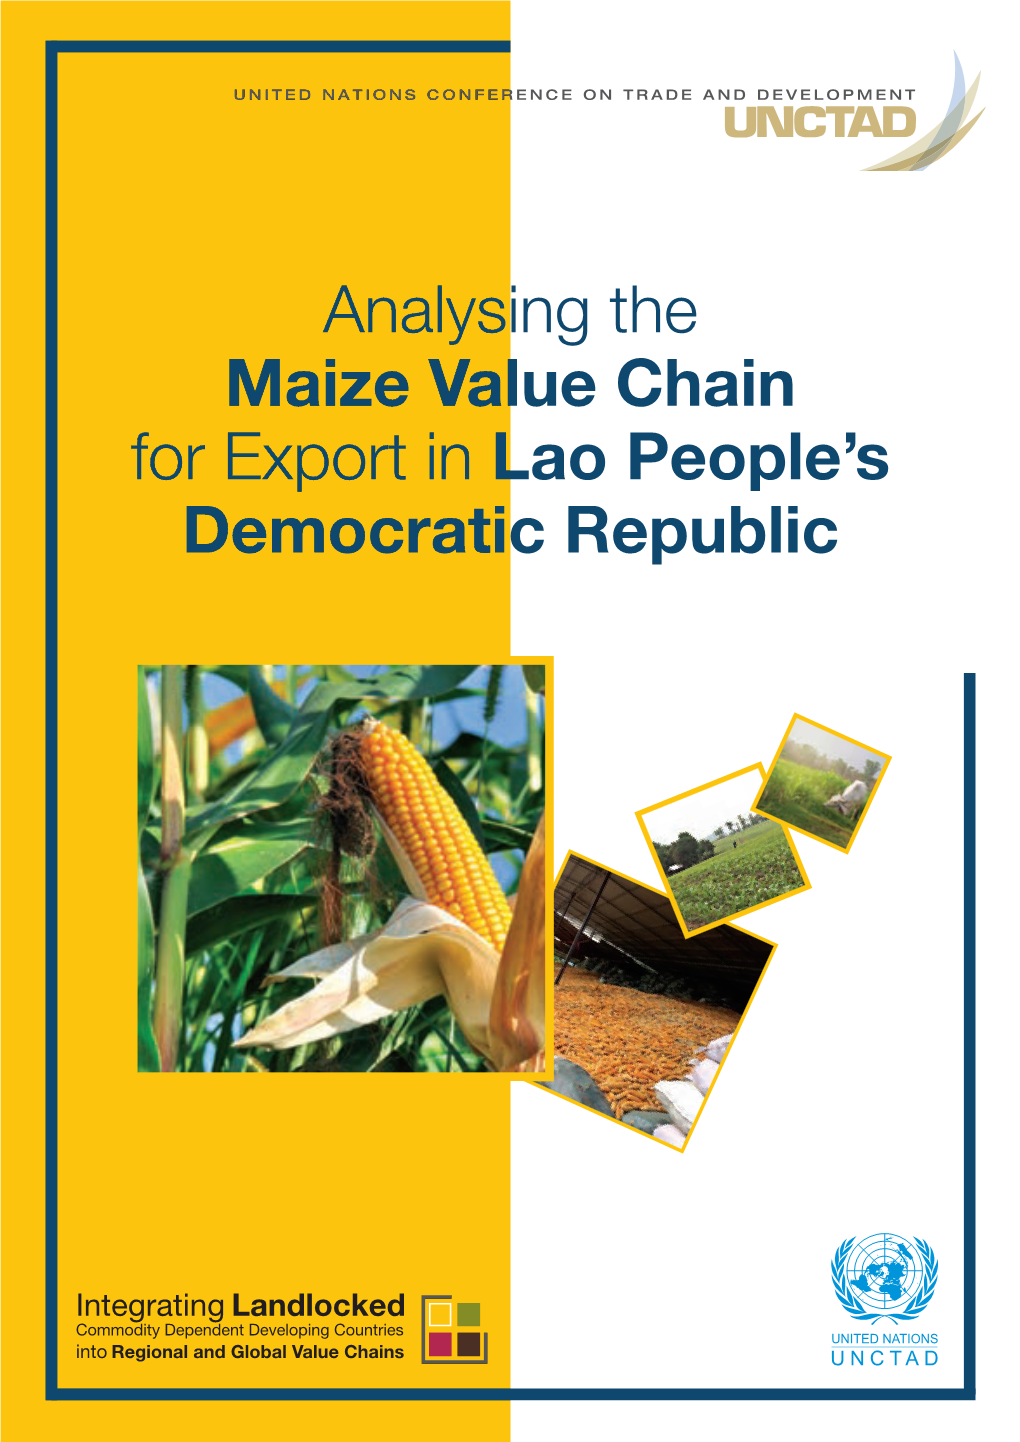 Analysing the Maize Value Chain for Export in Lao People's Democratic